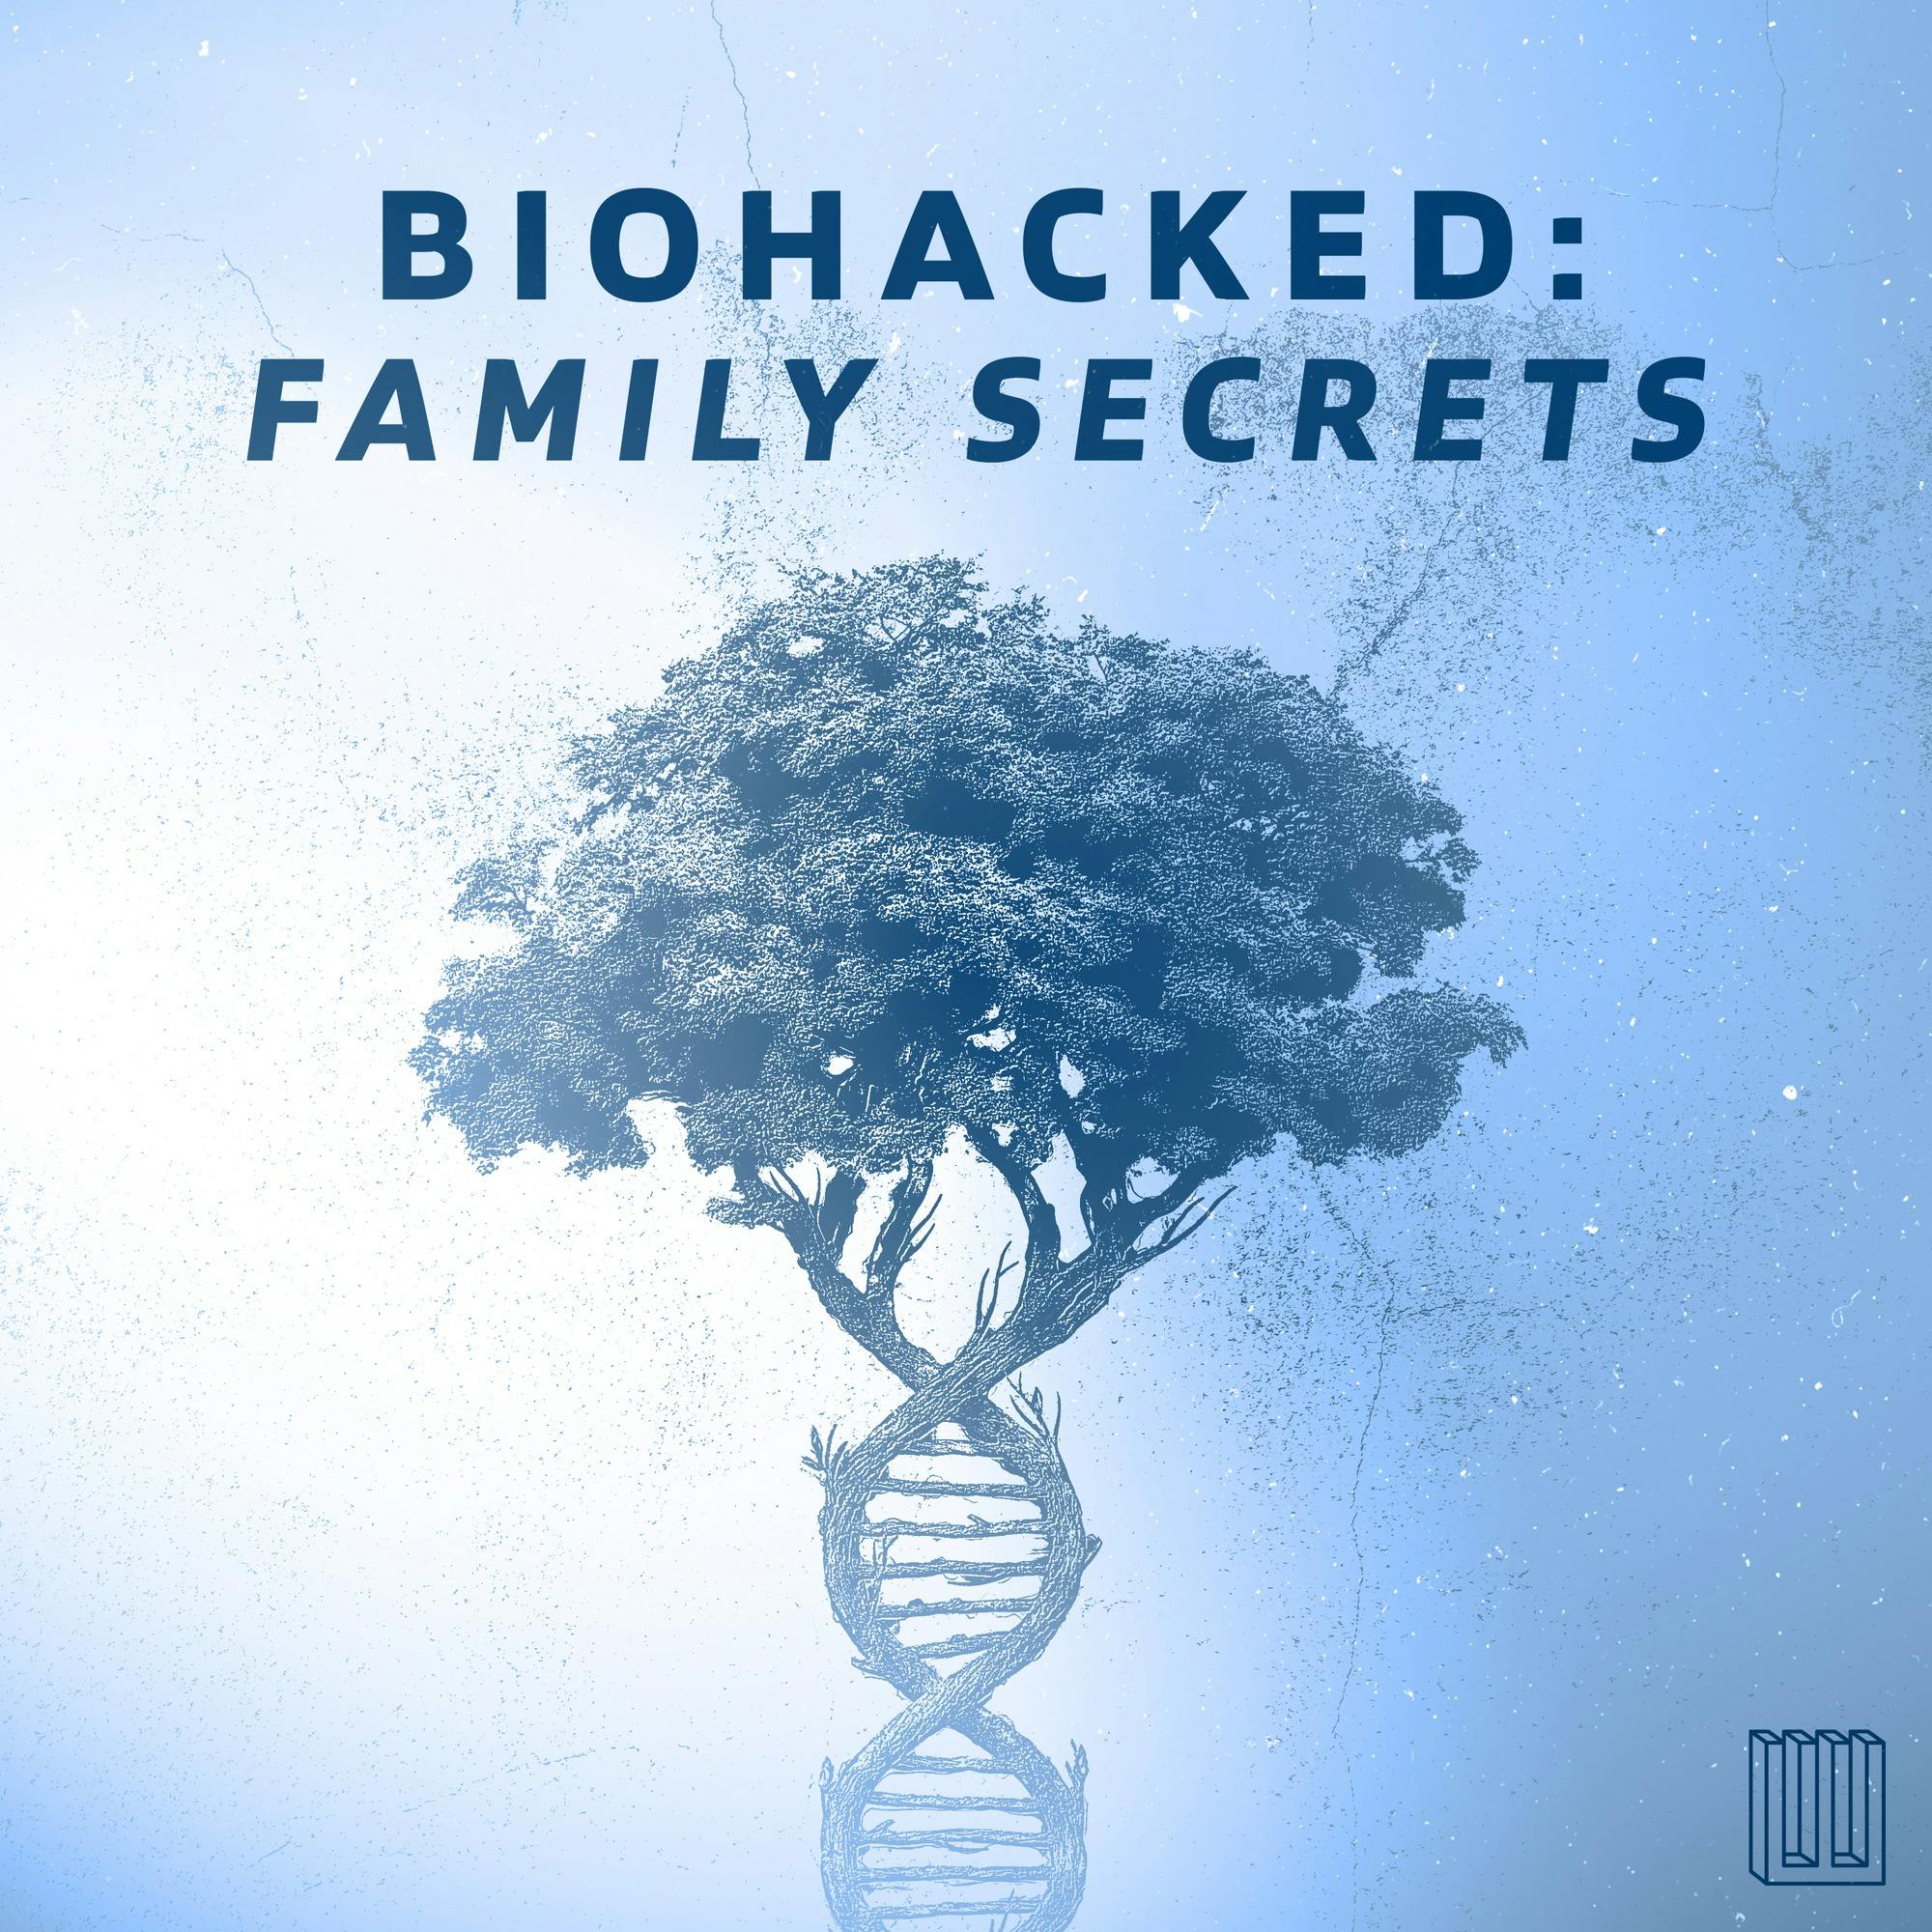 BioHacked | 10. The Great Sperm Drought